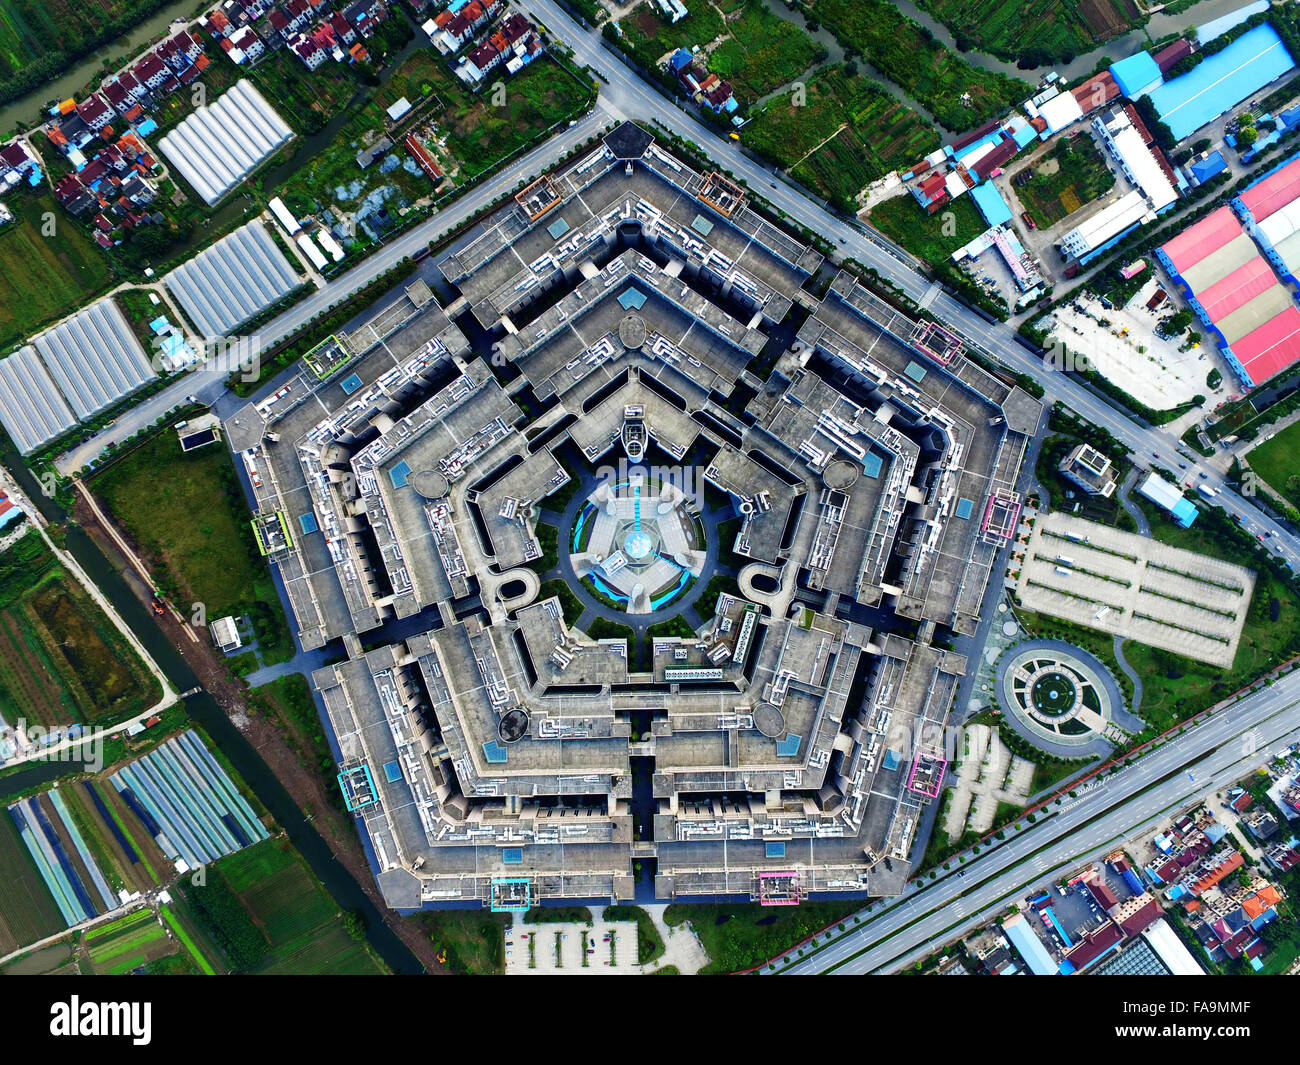 Page 3 - Pentagon Building High Resolution Stock Photography and Images